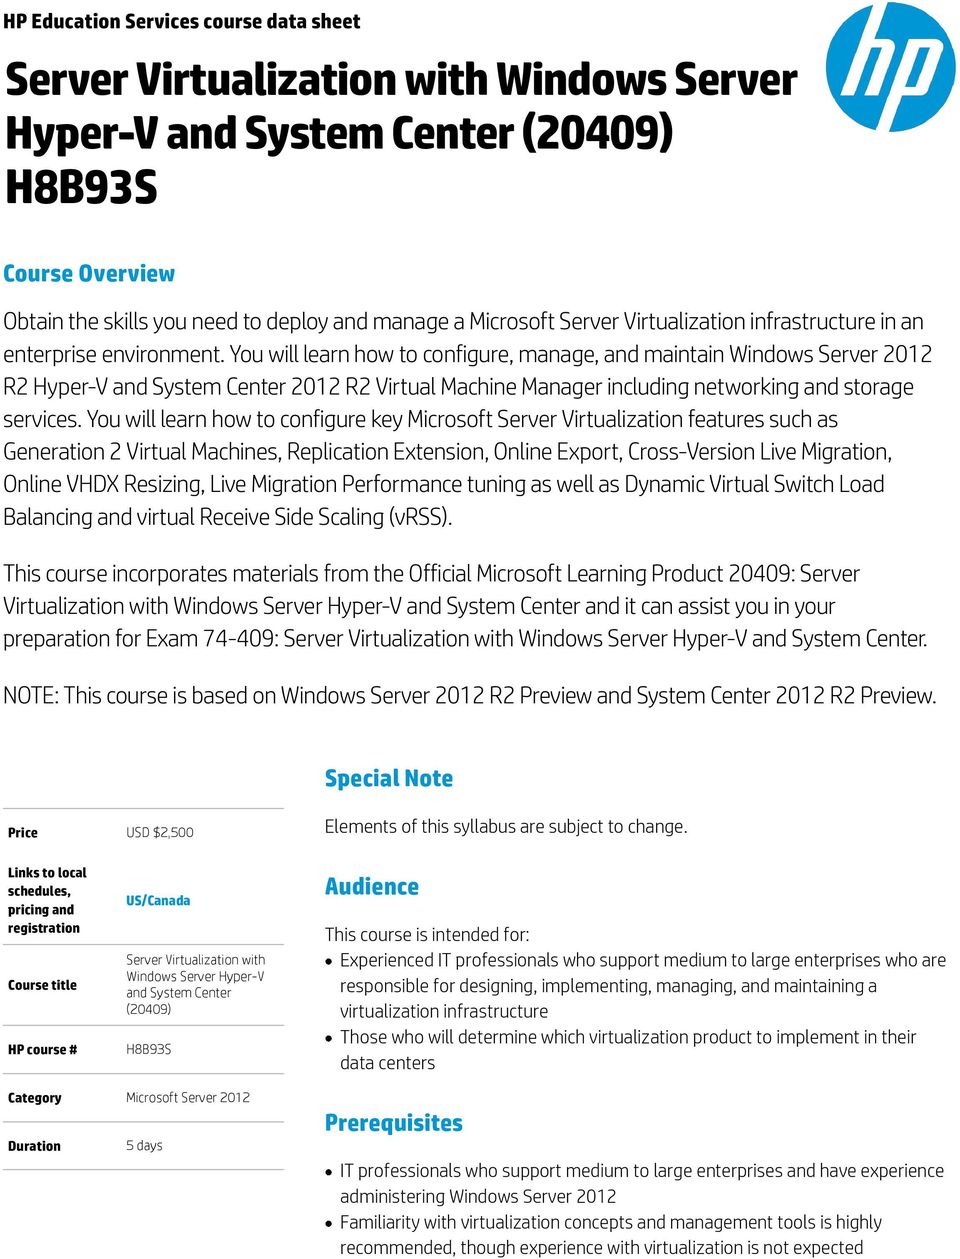 You will learn how to configure, manage, and maintain Windows Server 2012 R2 Hyper-V and System Center 2012 R2 Virtual Machine including networking and storage services.